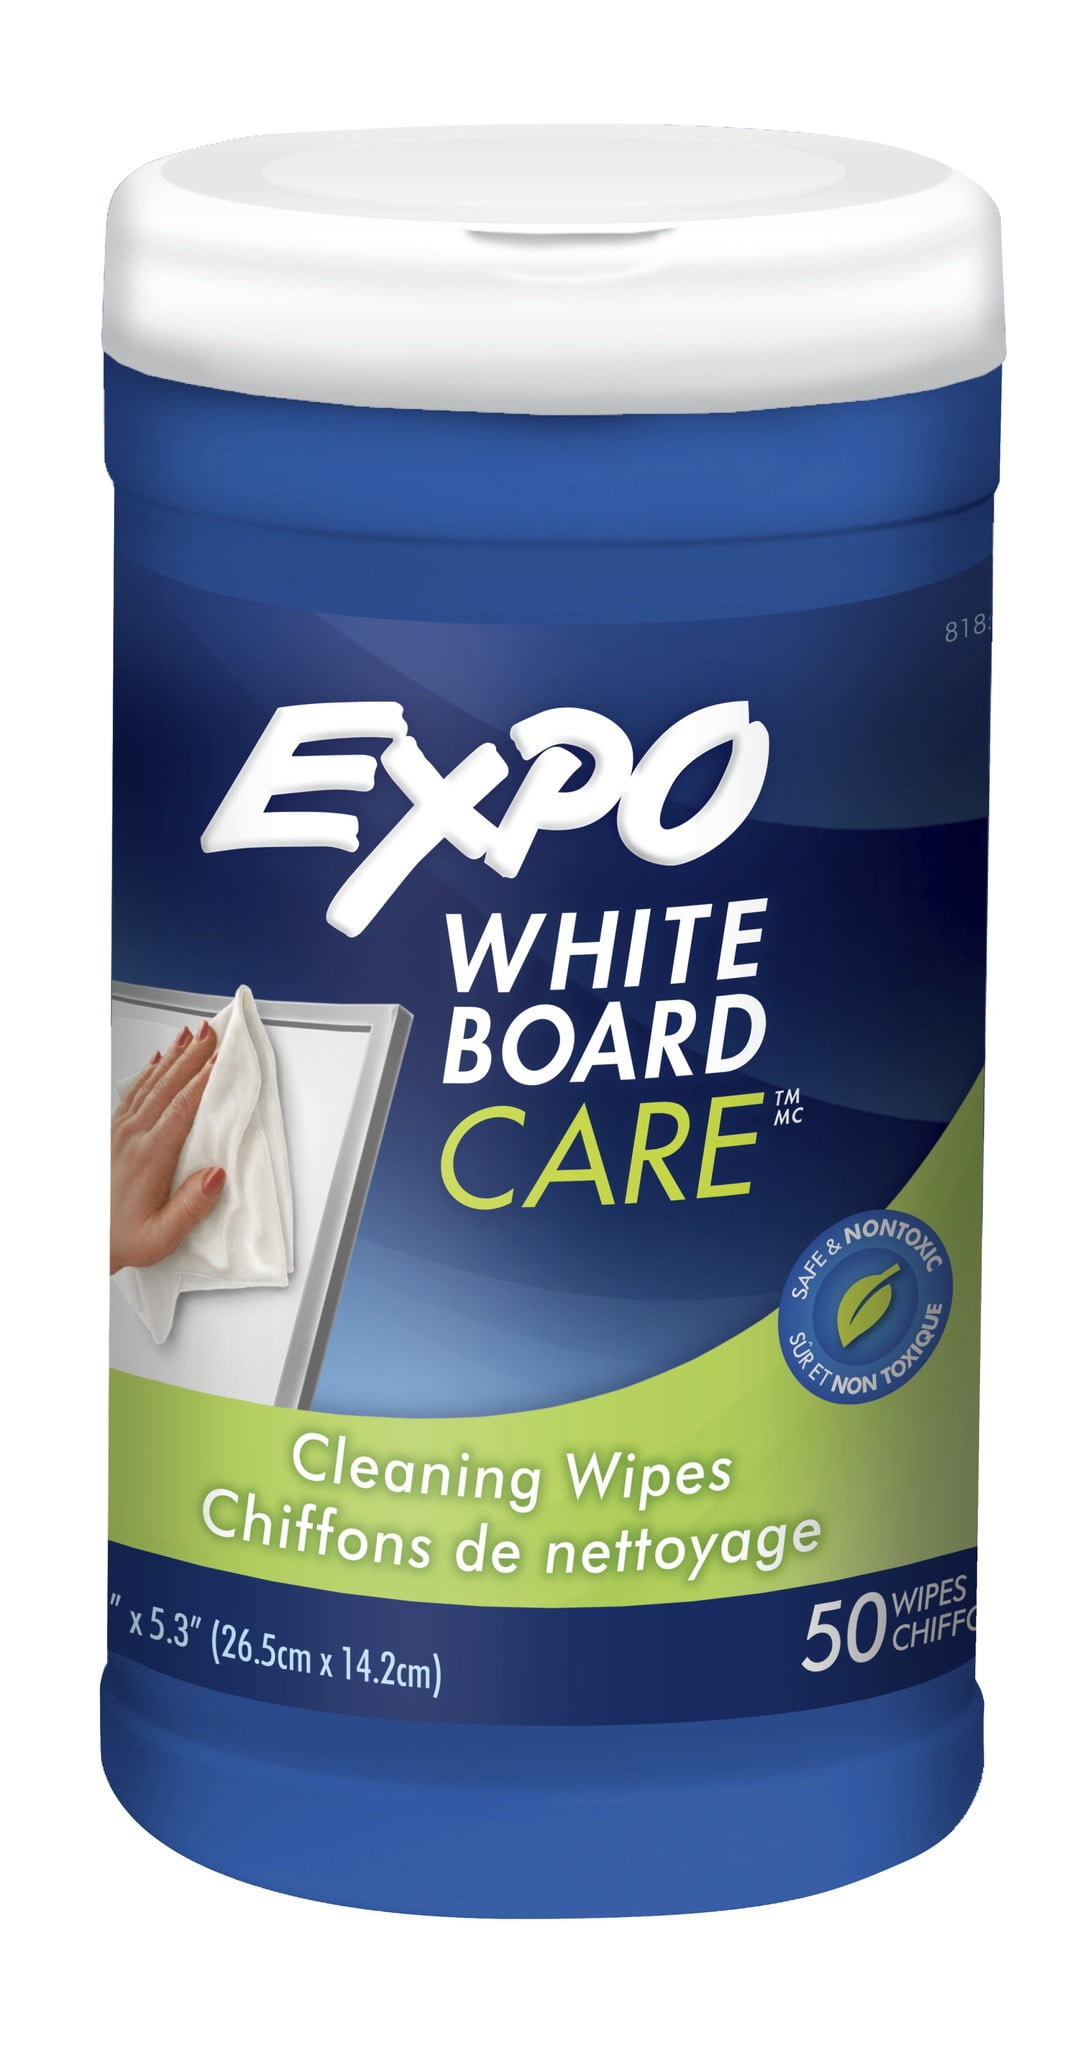 Top Auto Glass Cleaning Wet Wipes Suppliers - China Sywipe